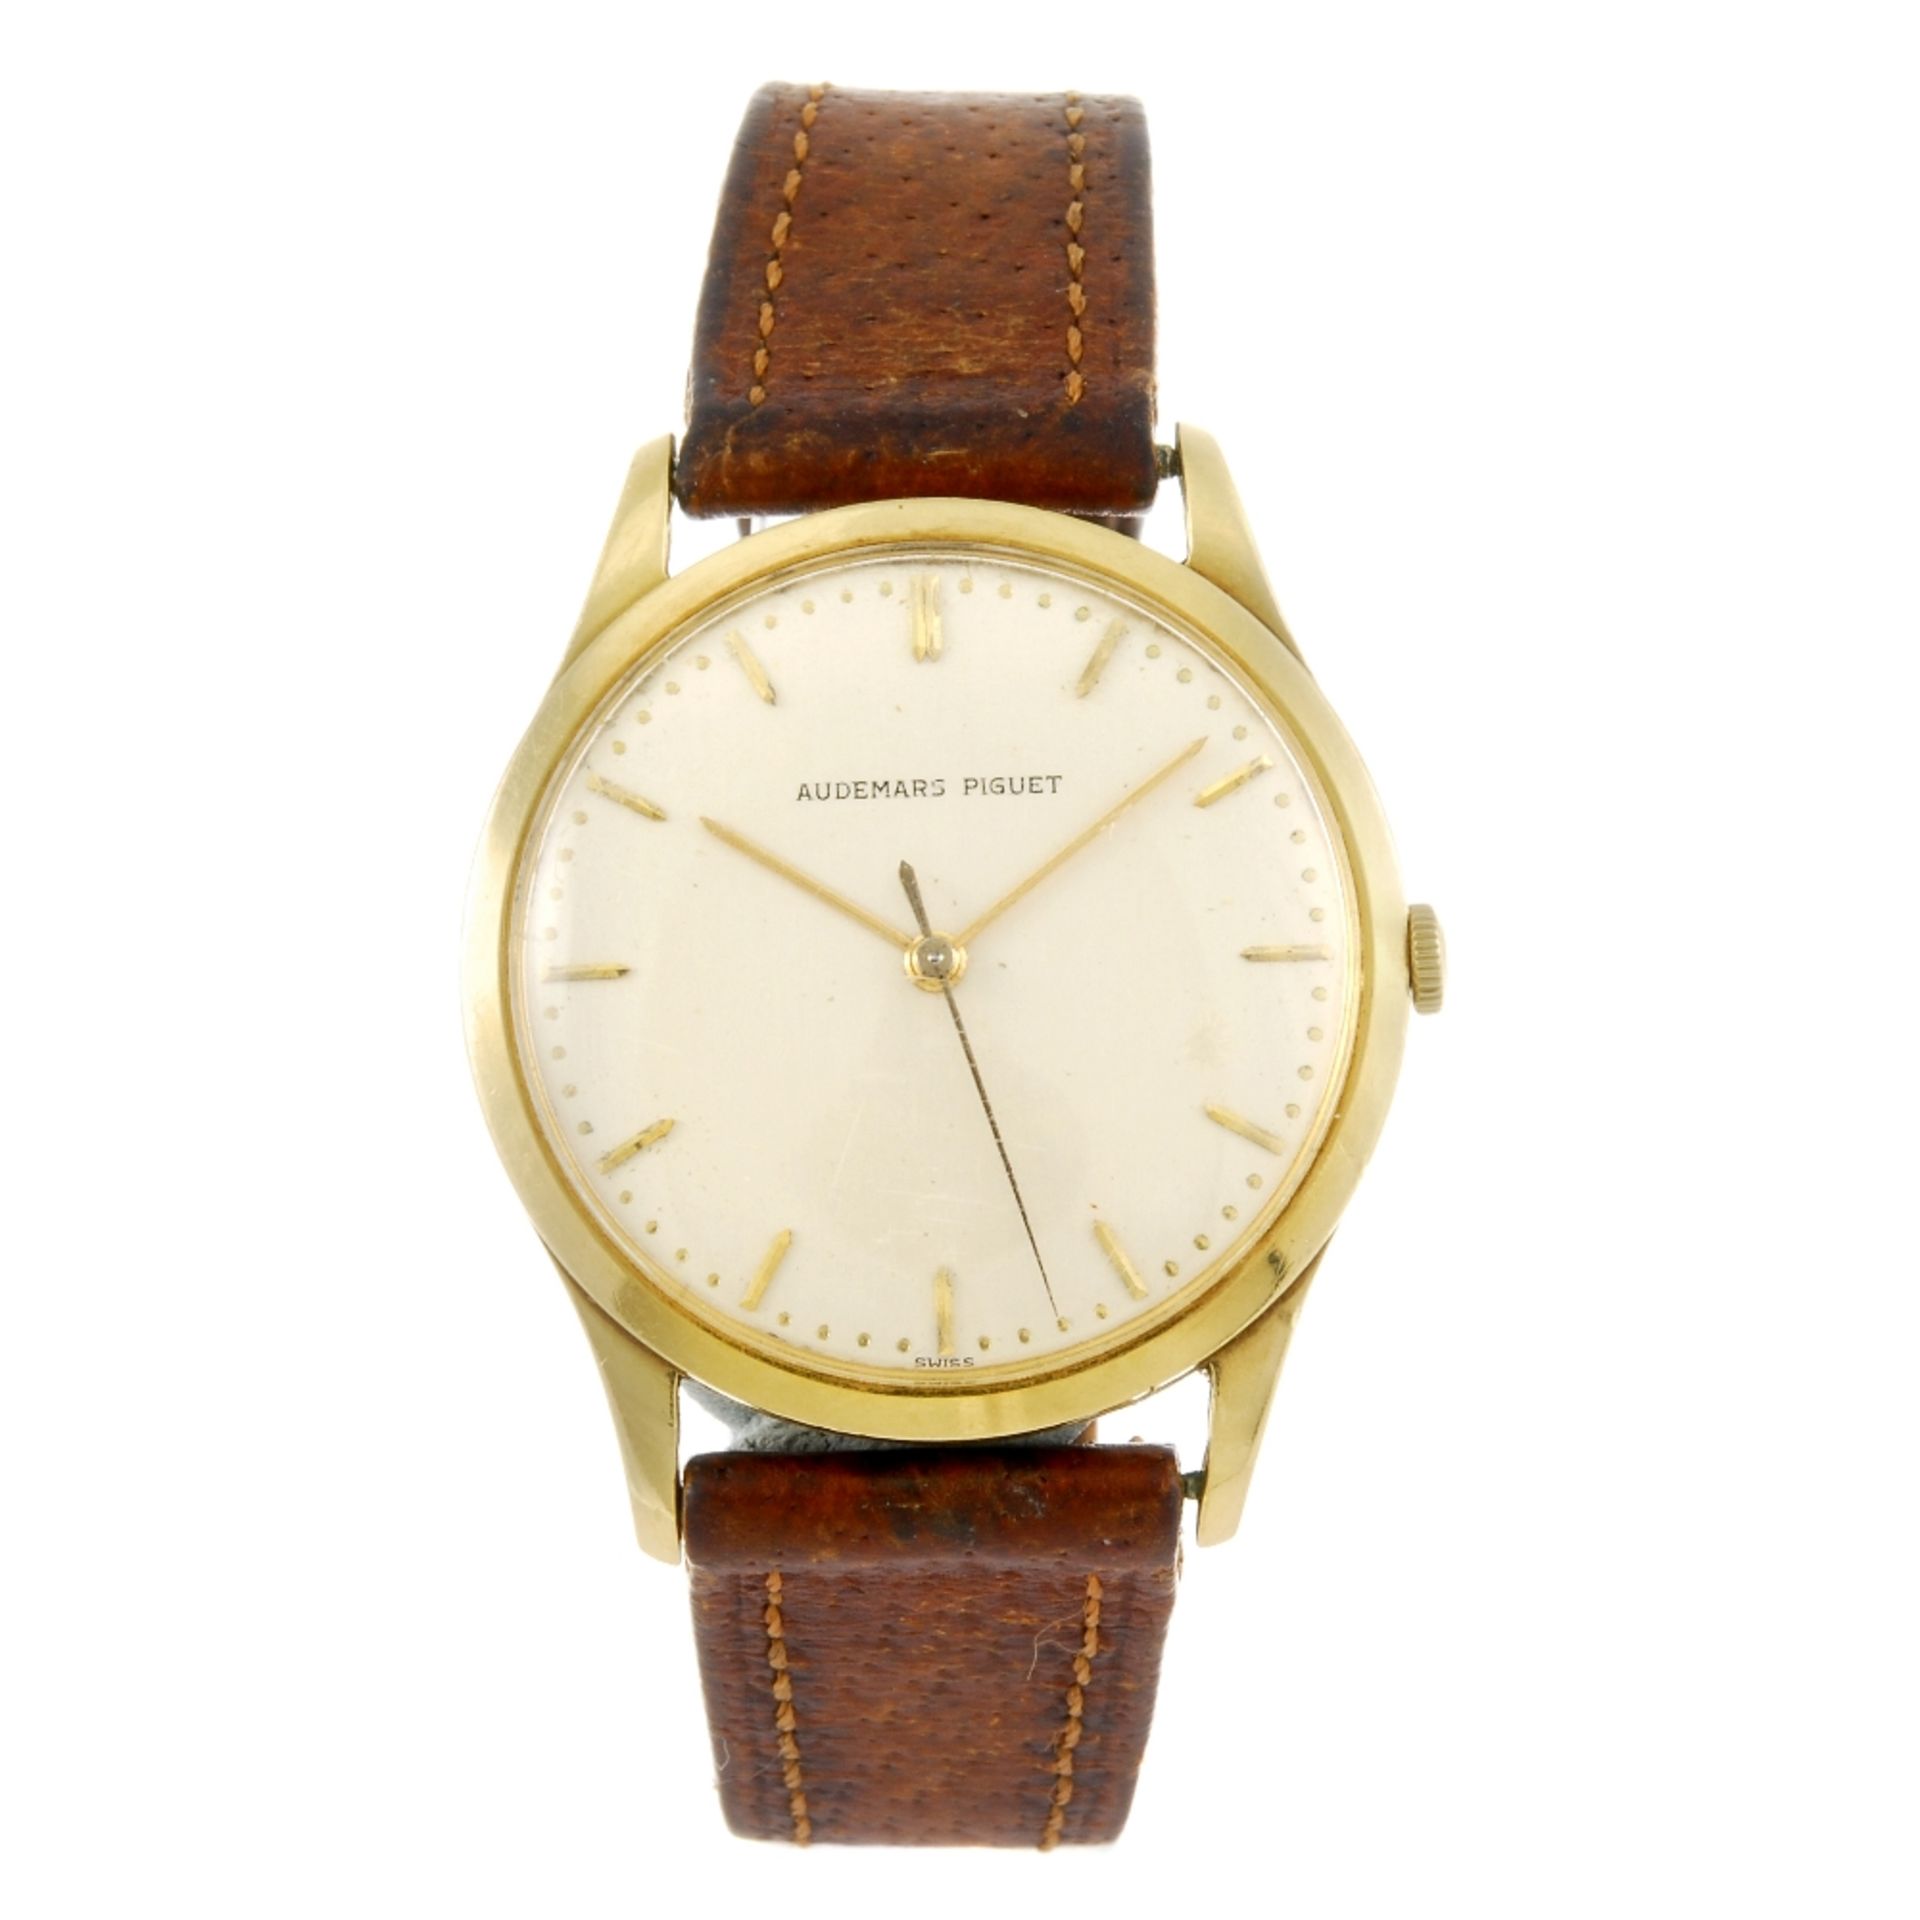 AUDEMARS PIGUET - a gentleman`s wrist watch. Stamped 18K 0.750 with poincon, numbered 14139. Signed